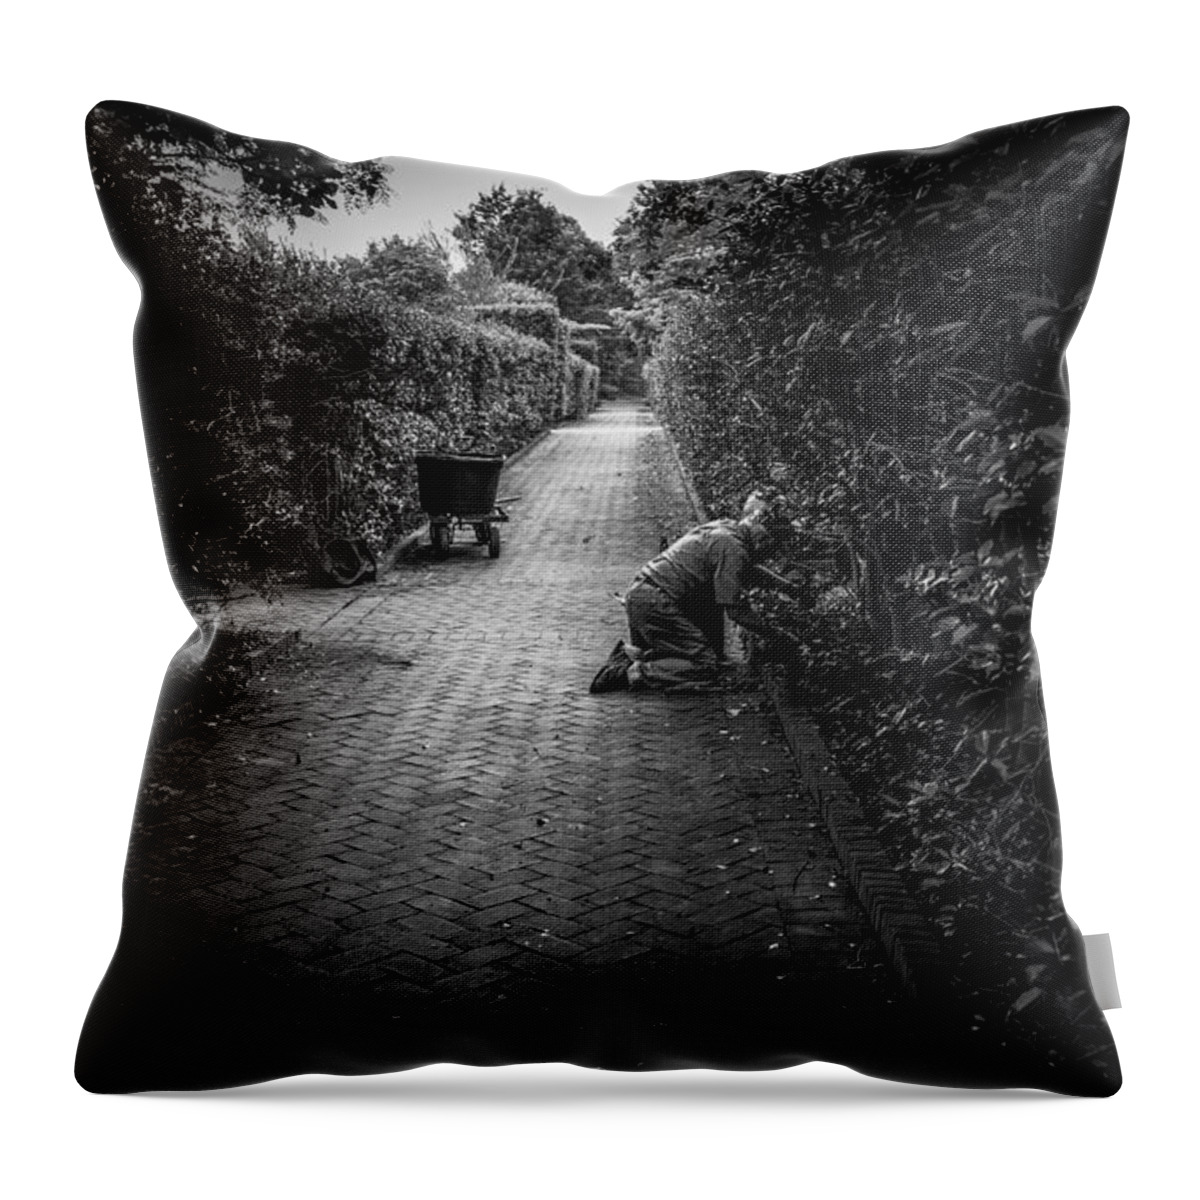  Throw Pillow featuring the photograph Gardener Of The Soul by Rodney Lee Williams